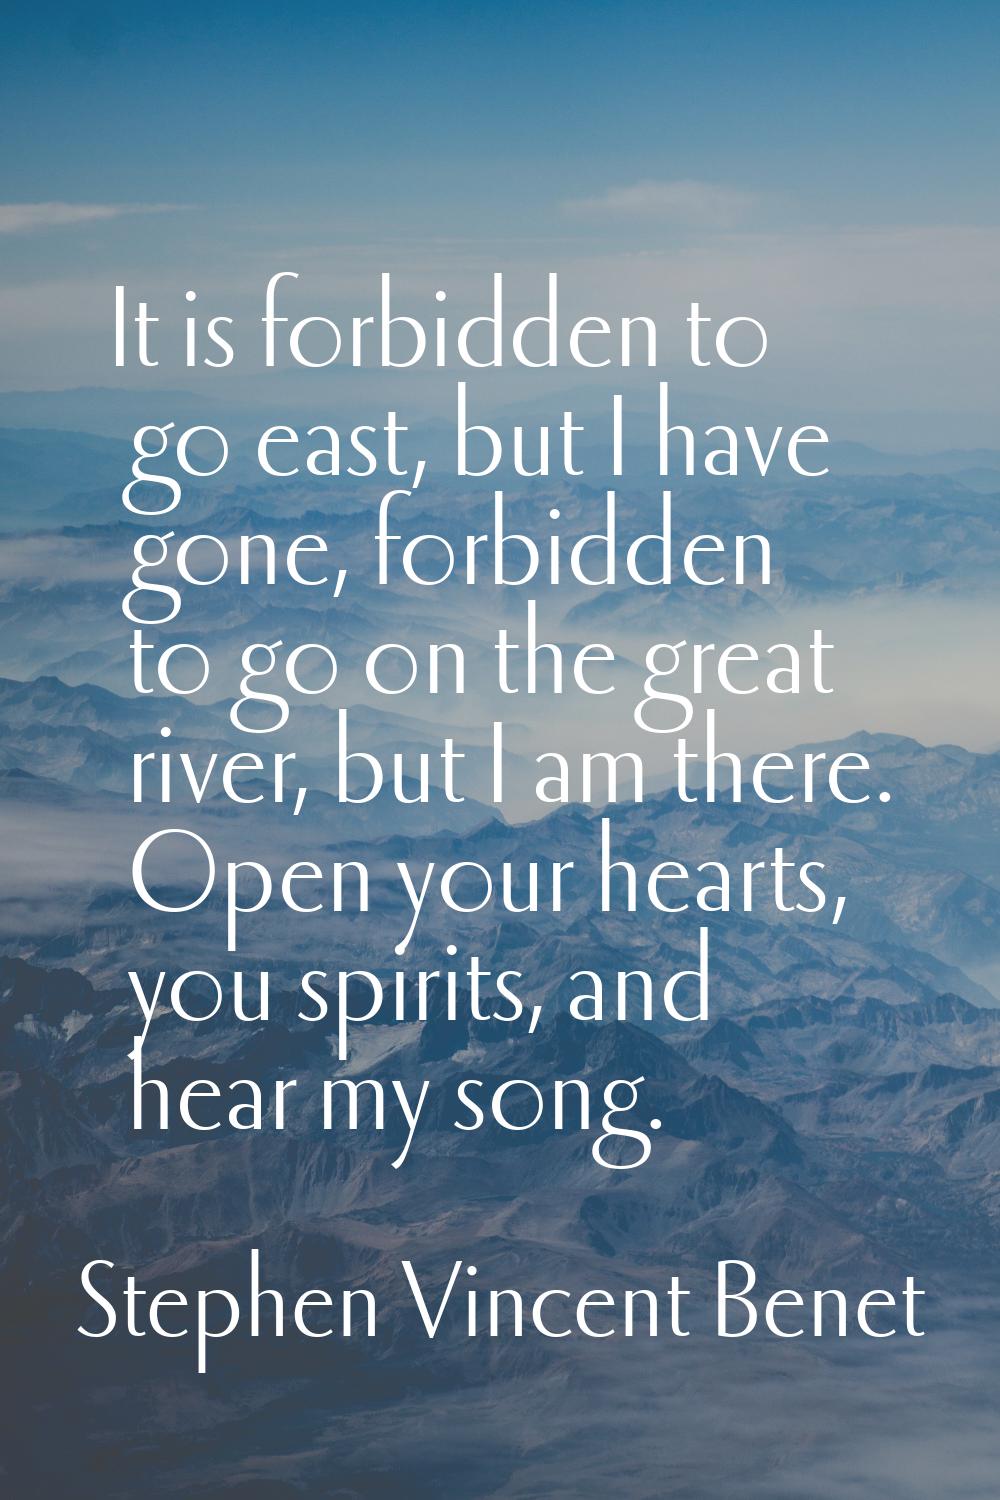 It is forbidden to go east, but I have gone, forbidden to go on the great river, but I am there. Op